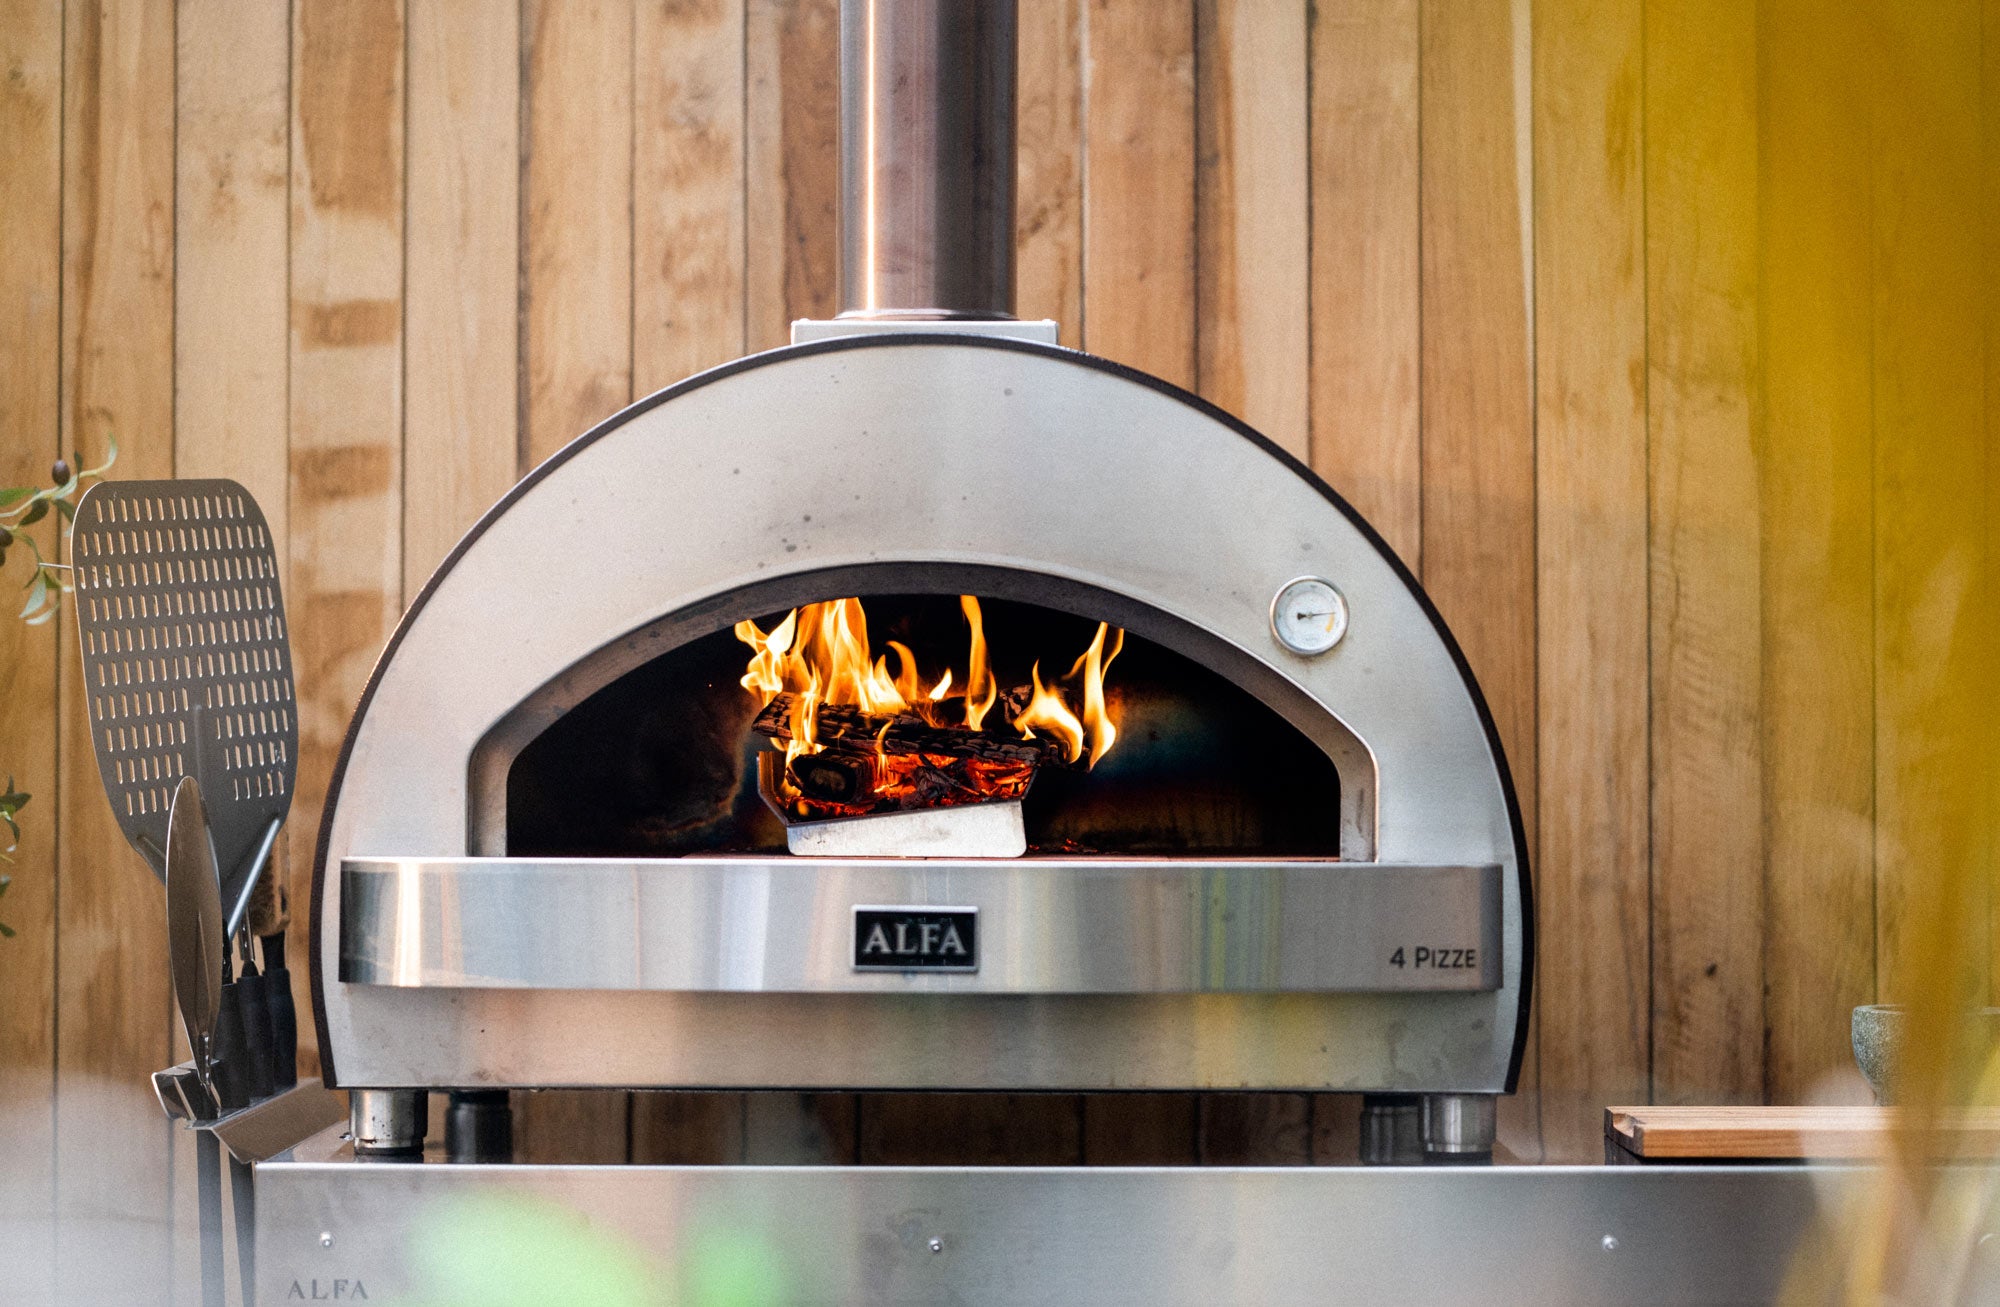 Classico 4 Pizze oven | Wood fired | Alfa Ovens